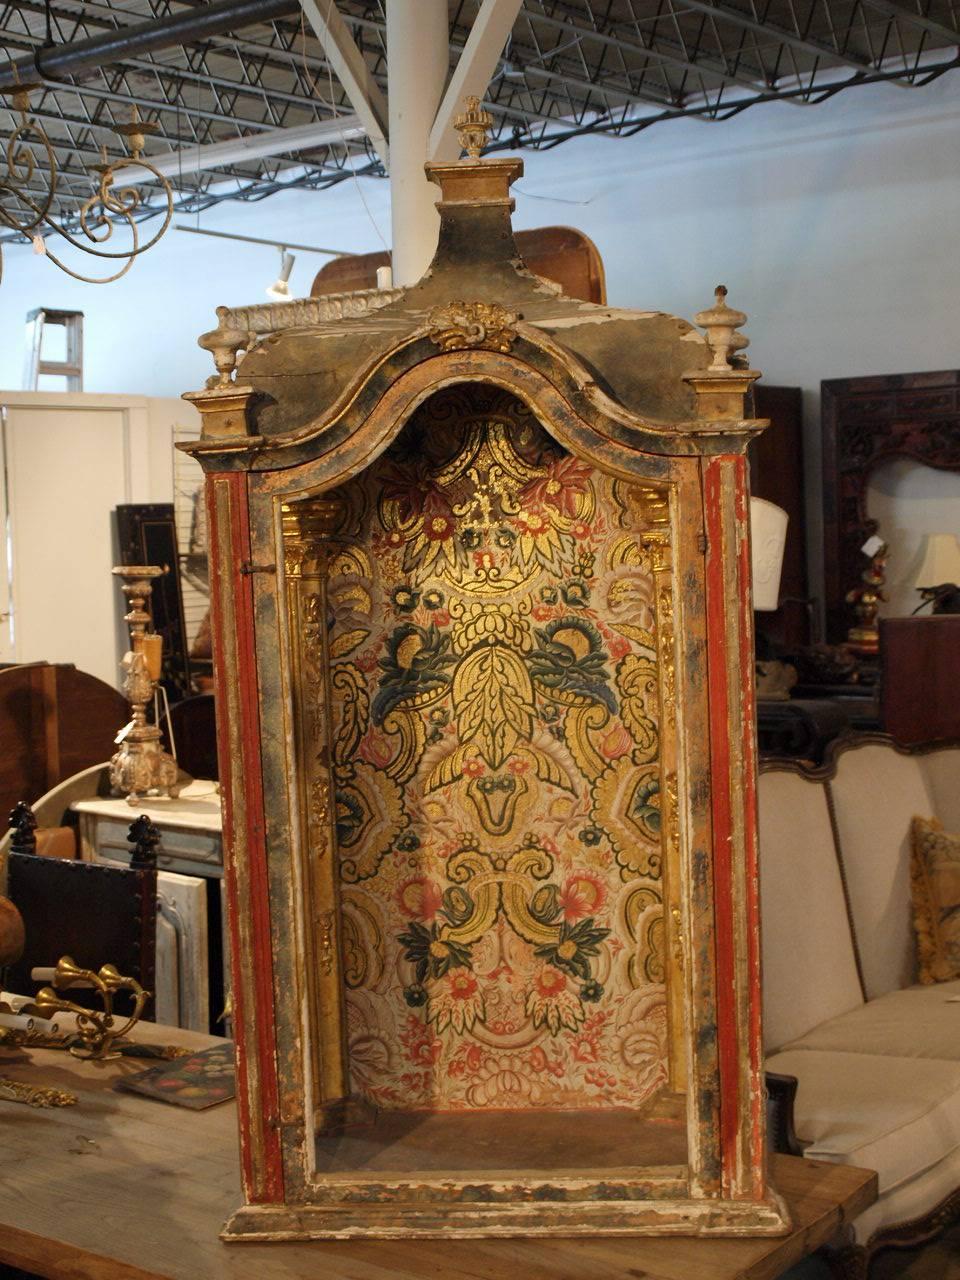 An outstanding 17th century Spanish tabernacle, niche in polychromed and giltwood. The cabinets were used to display statues of saints. Beautifully constructed with a curvilinear roof and three opening door frames.